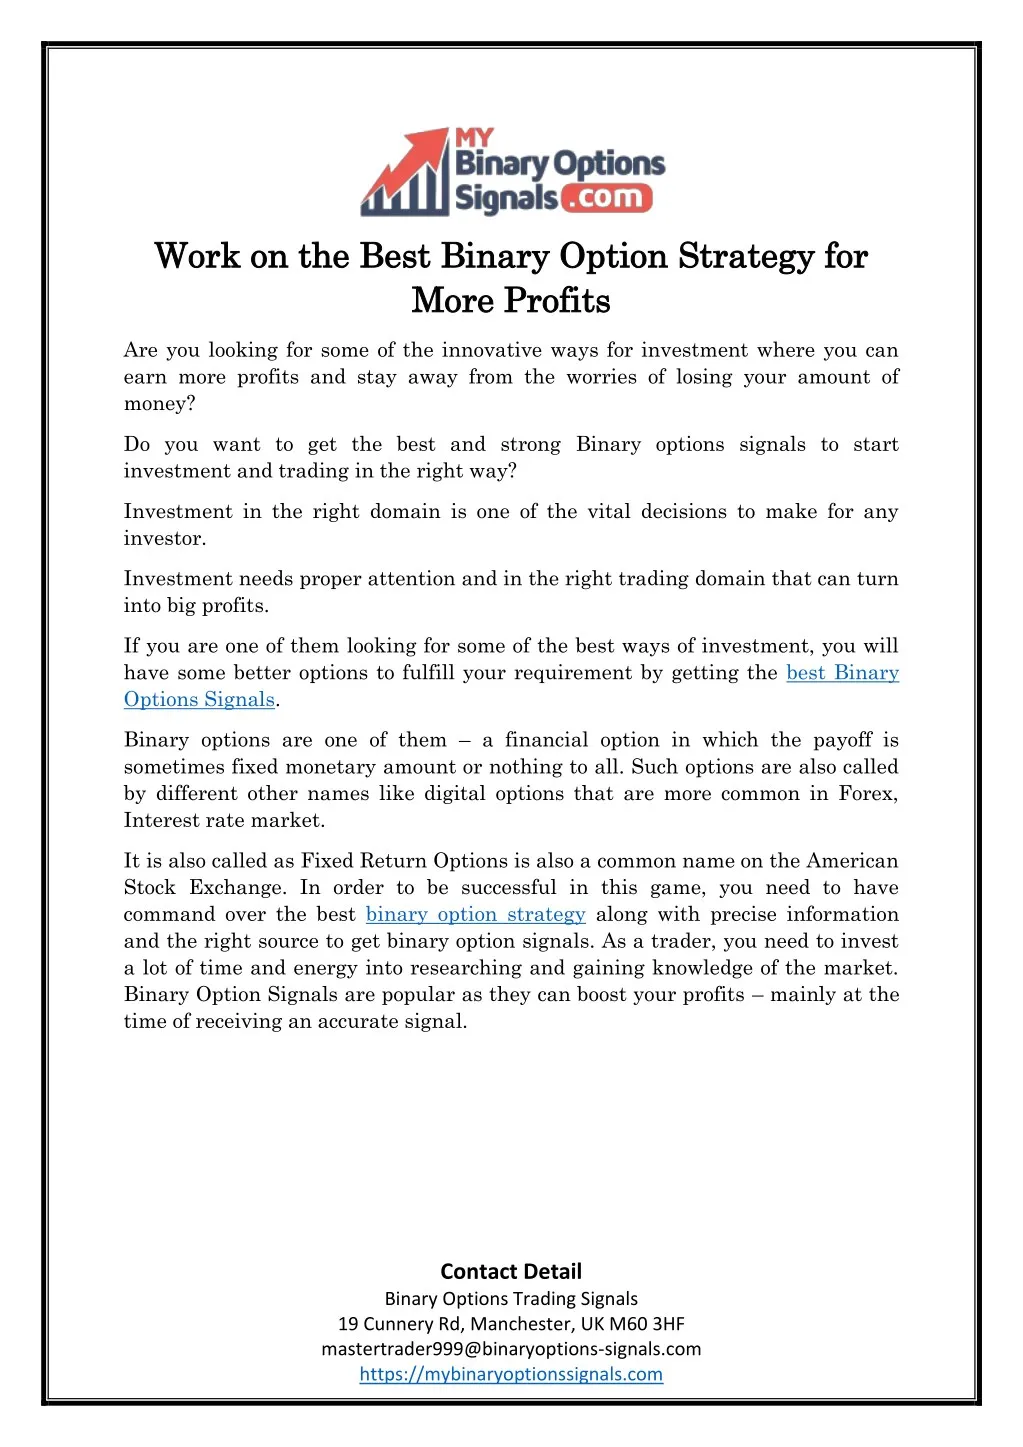 work on the best binary option strategy for work